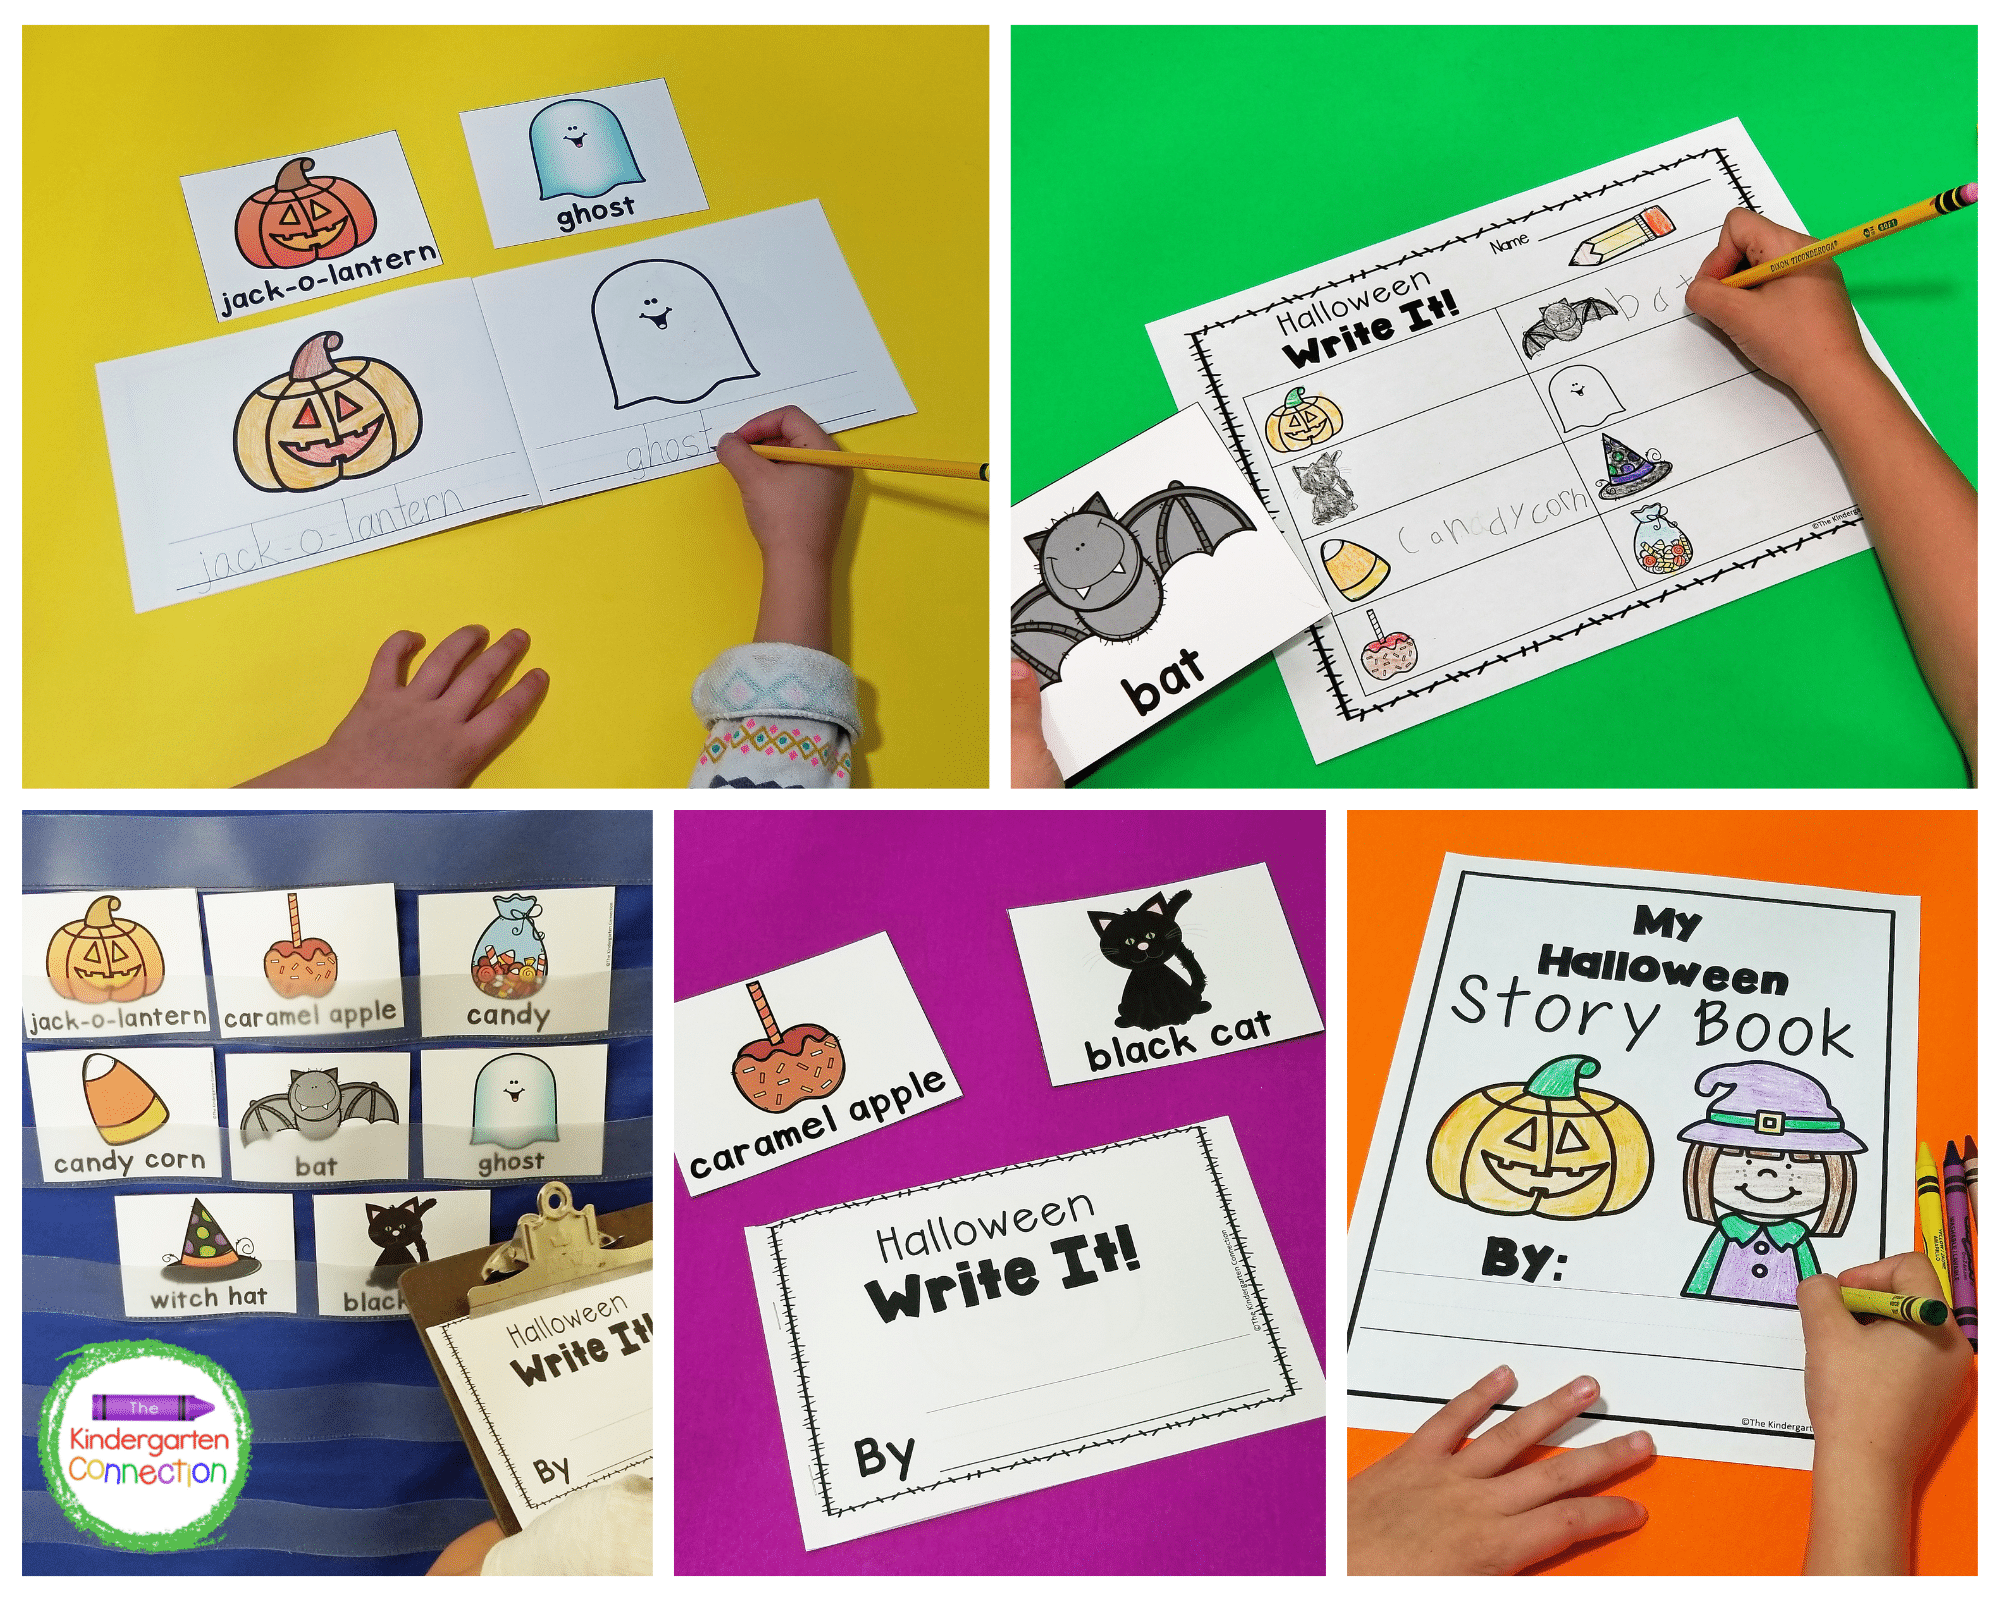 These Halloween writing activities are hands-on, fun, and engaging!